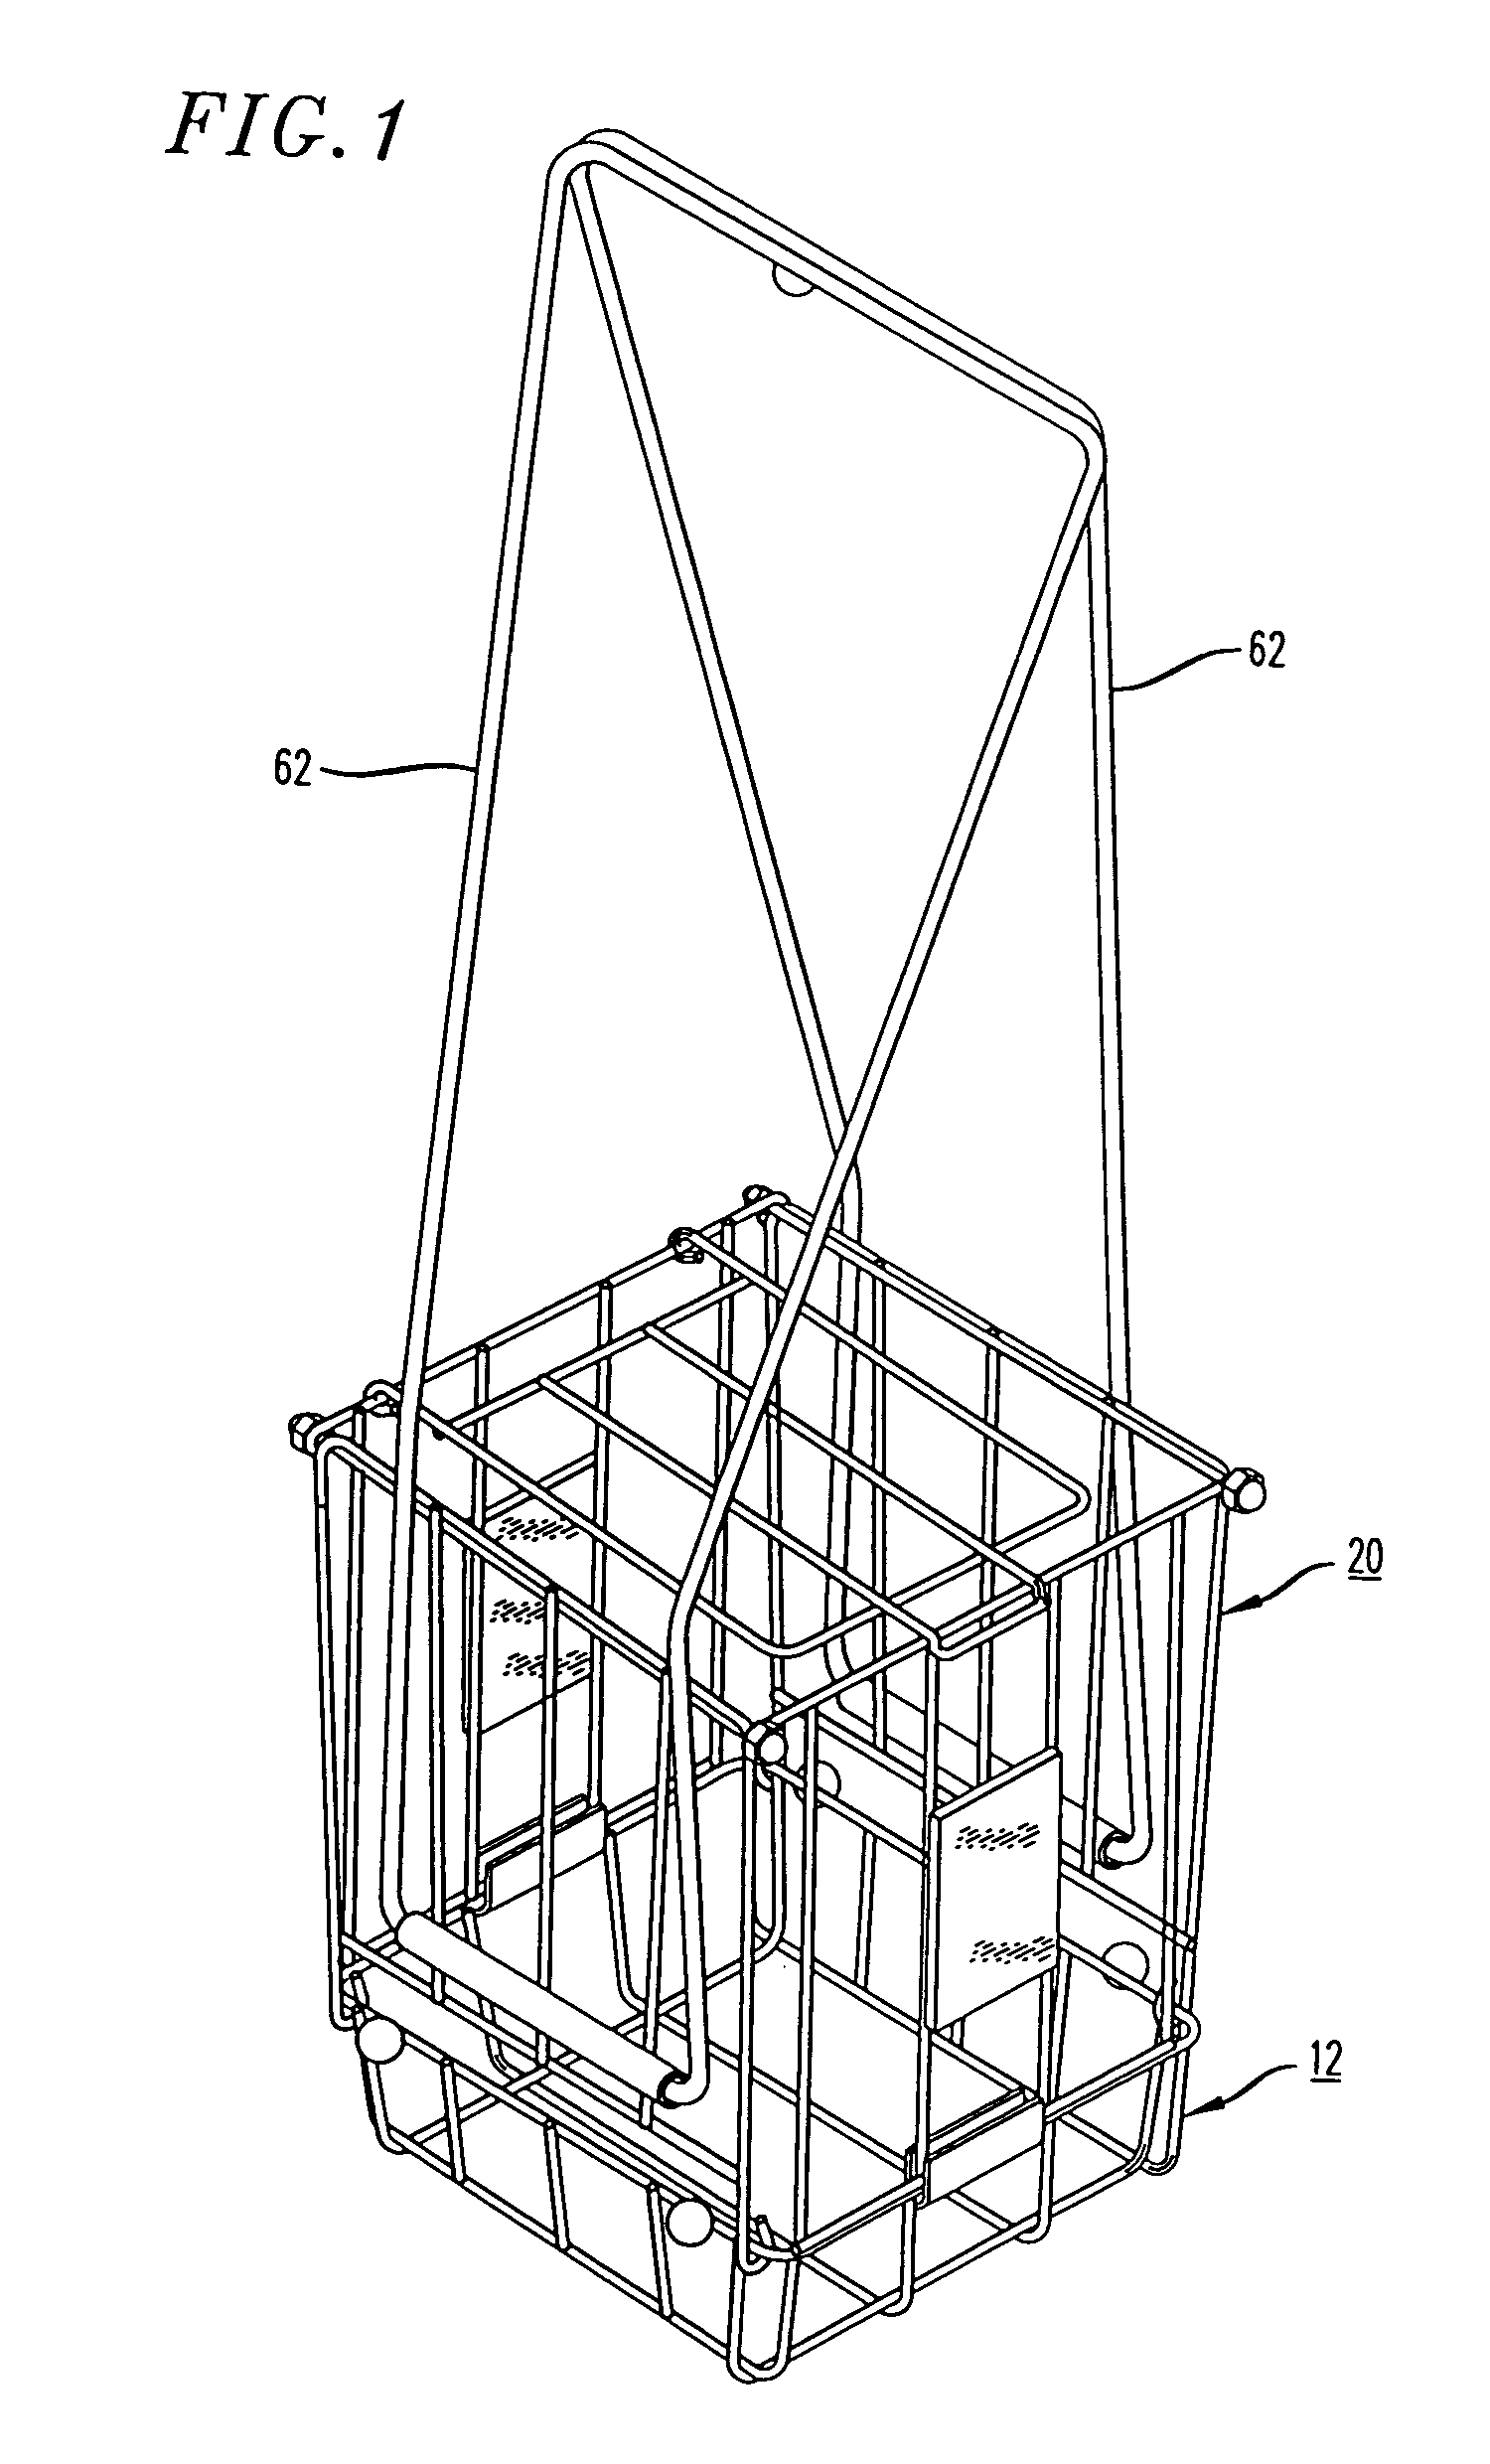 Collapsible basket assembly